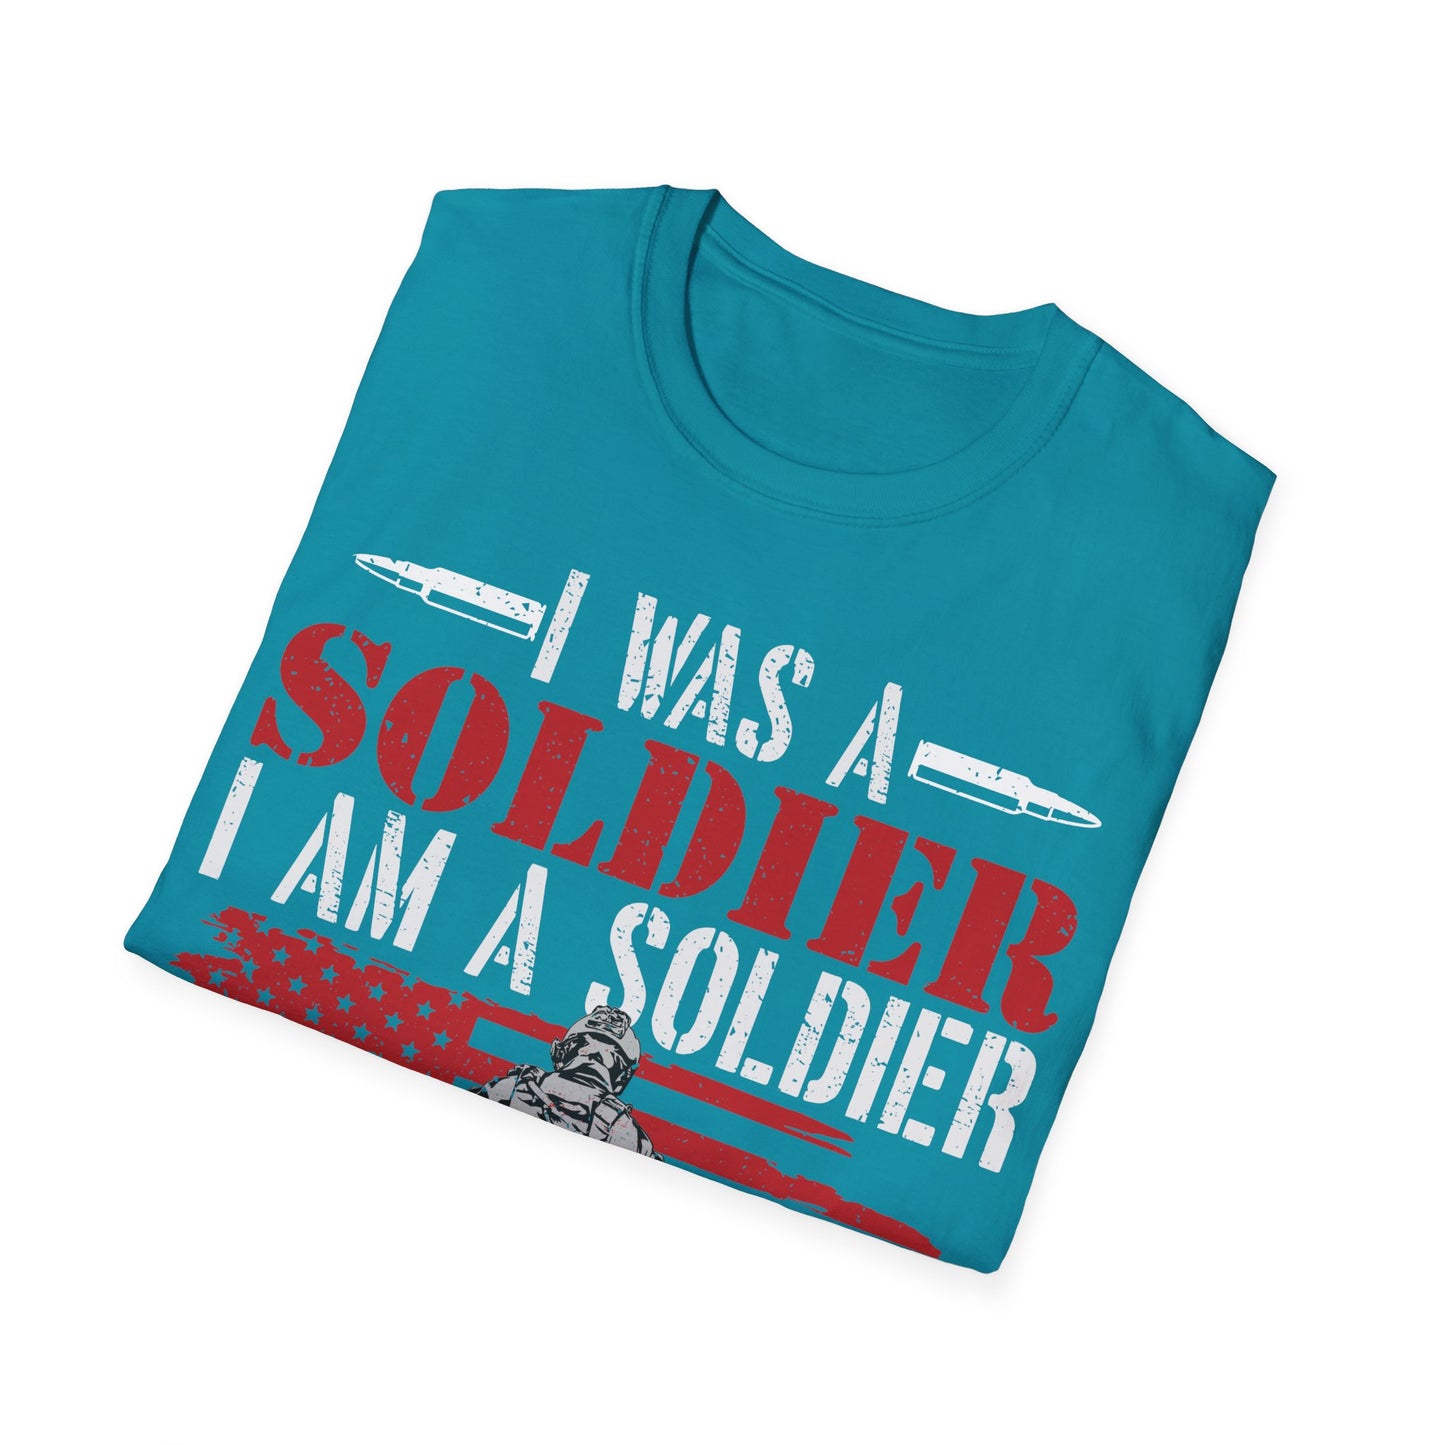 Always Be A Soldier - Unisex Softstyle T-Shirt